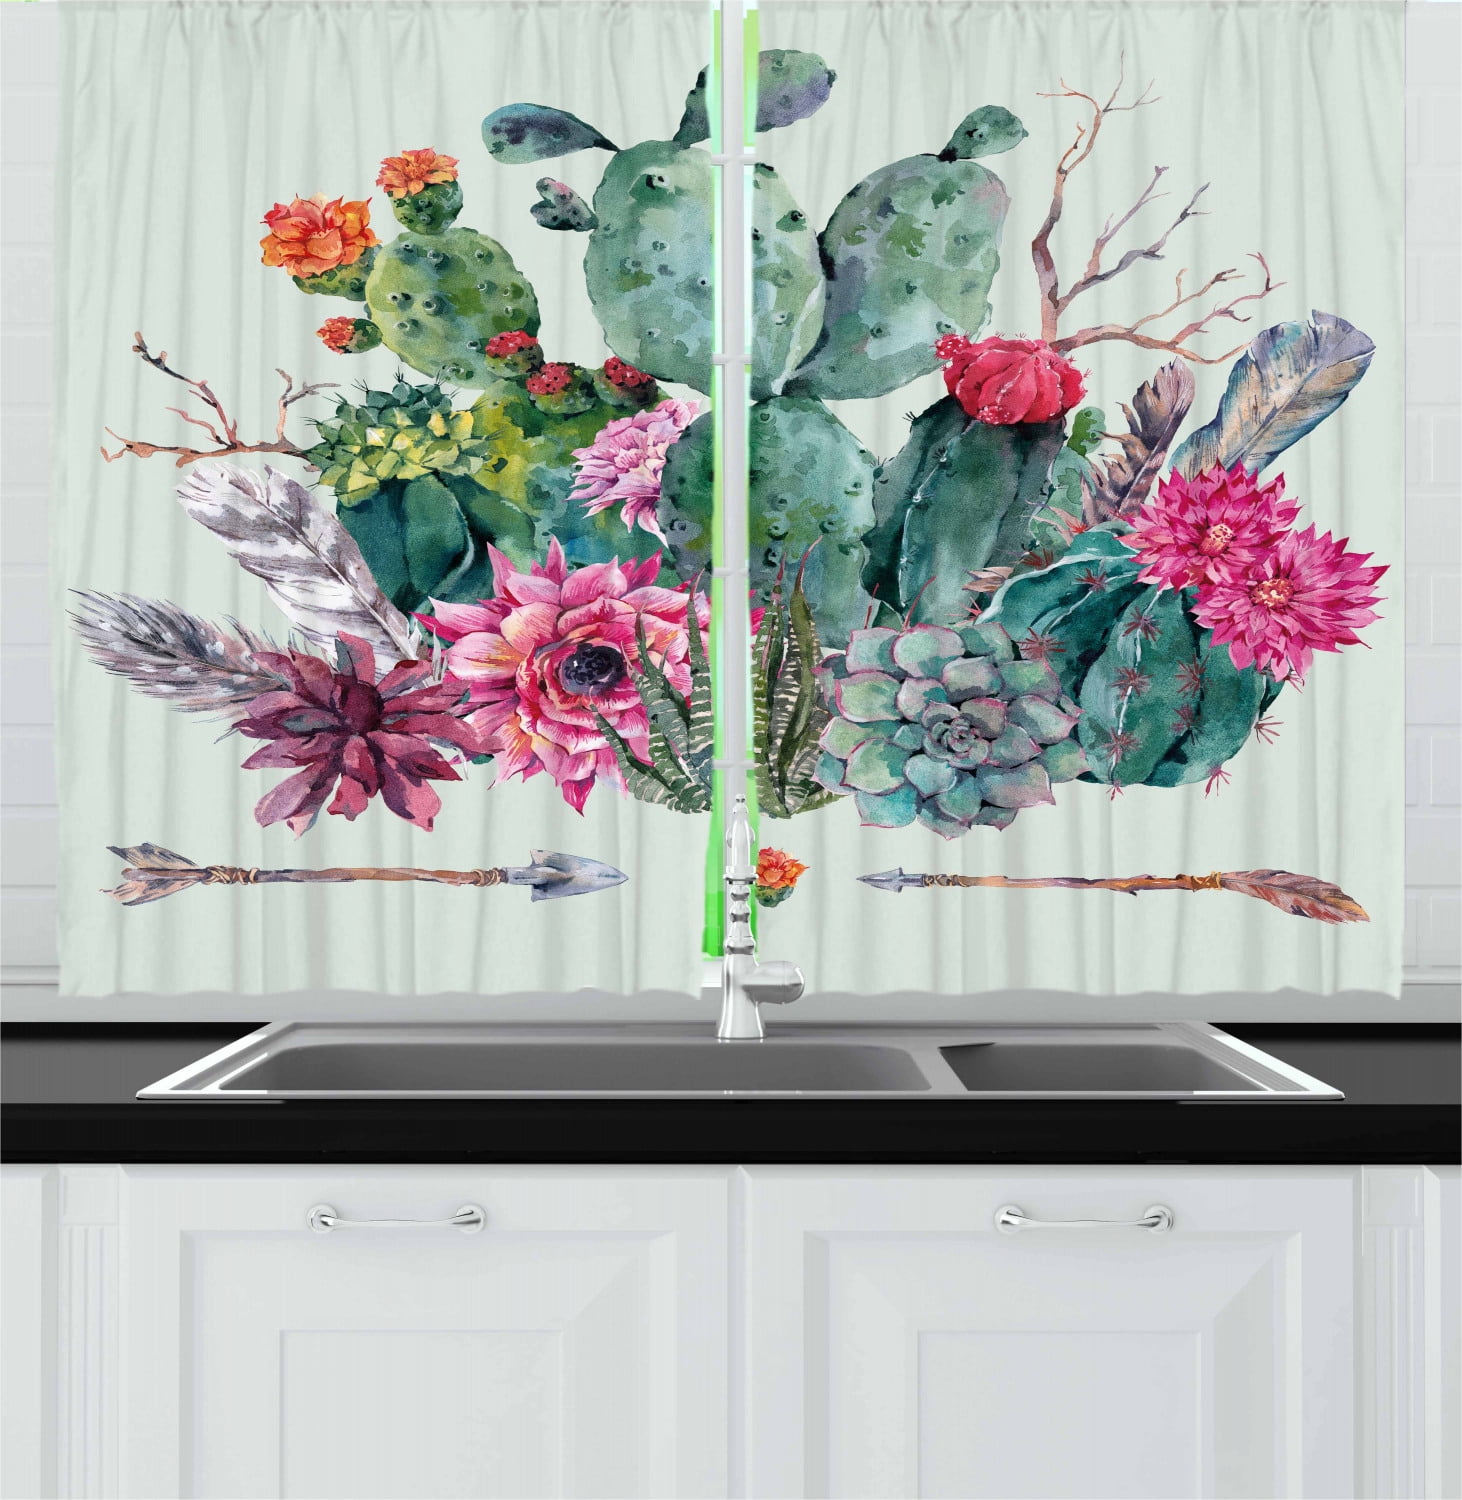 2 Panels Cactus Curtains Living Room Window Curtain Drapes Bedroom Kitchen Decor 